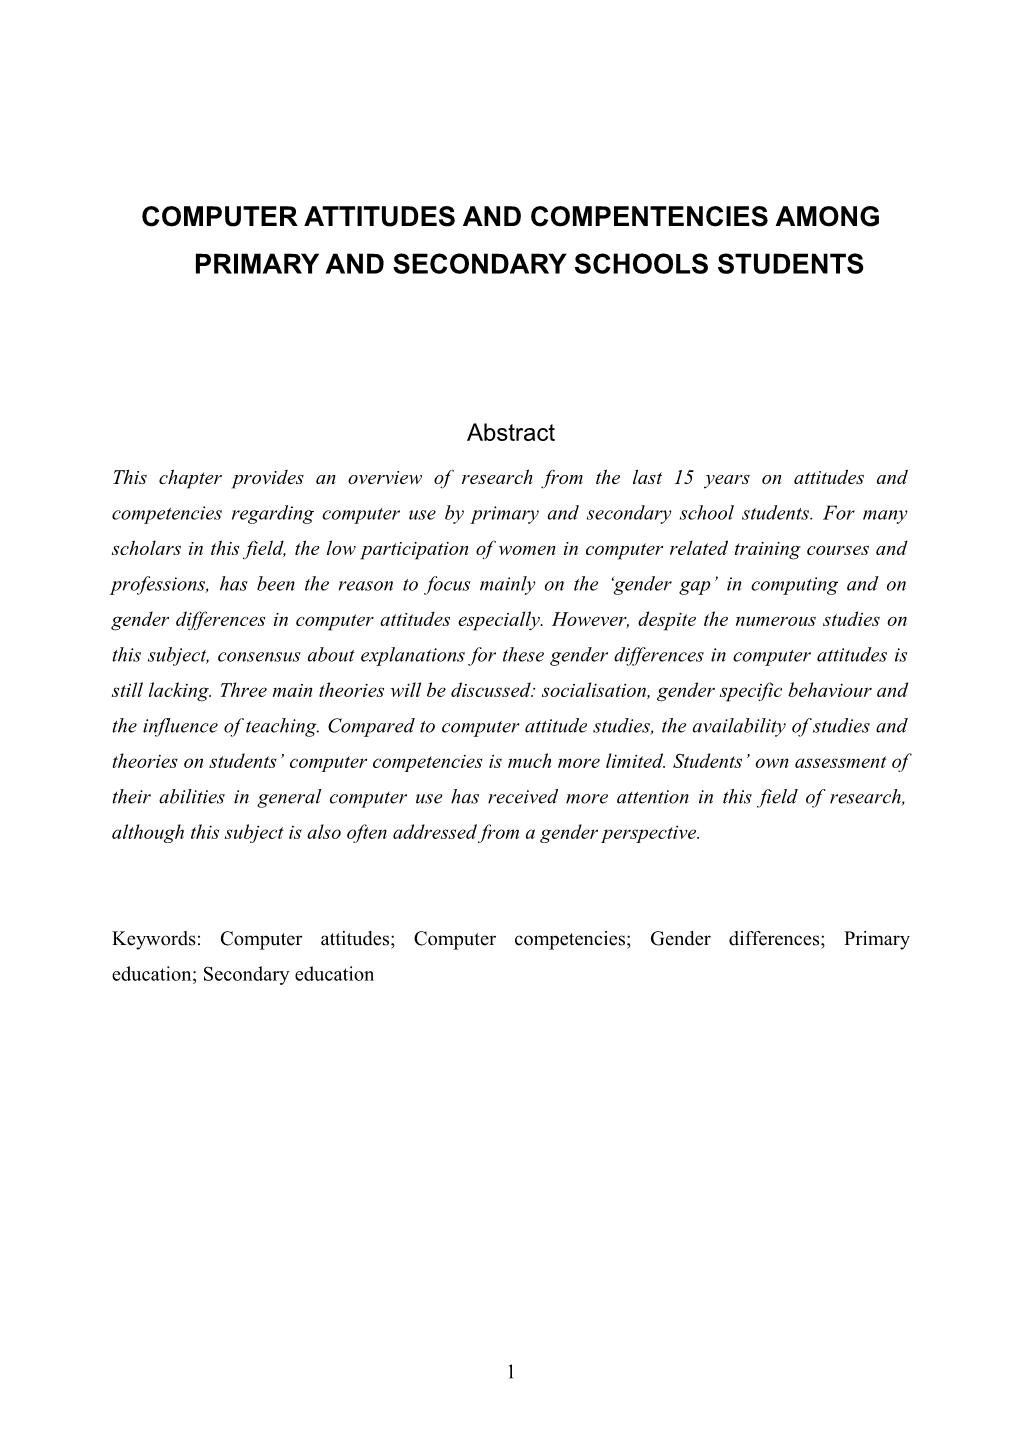 Computer Attitudes and Compentencies Among Primary and Secondary Schools Students